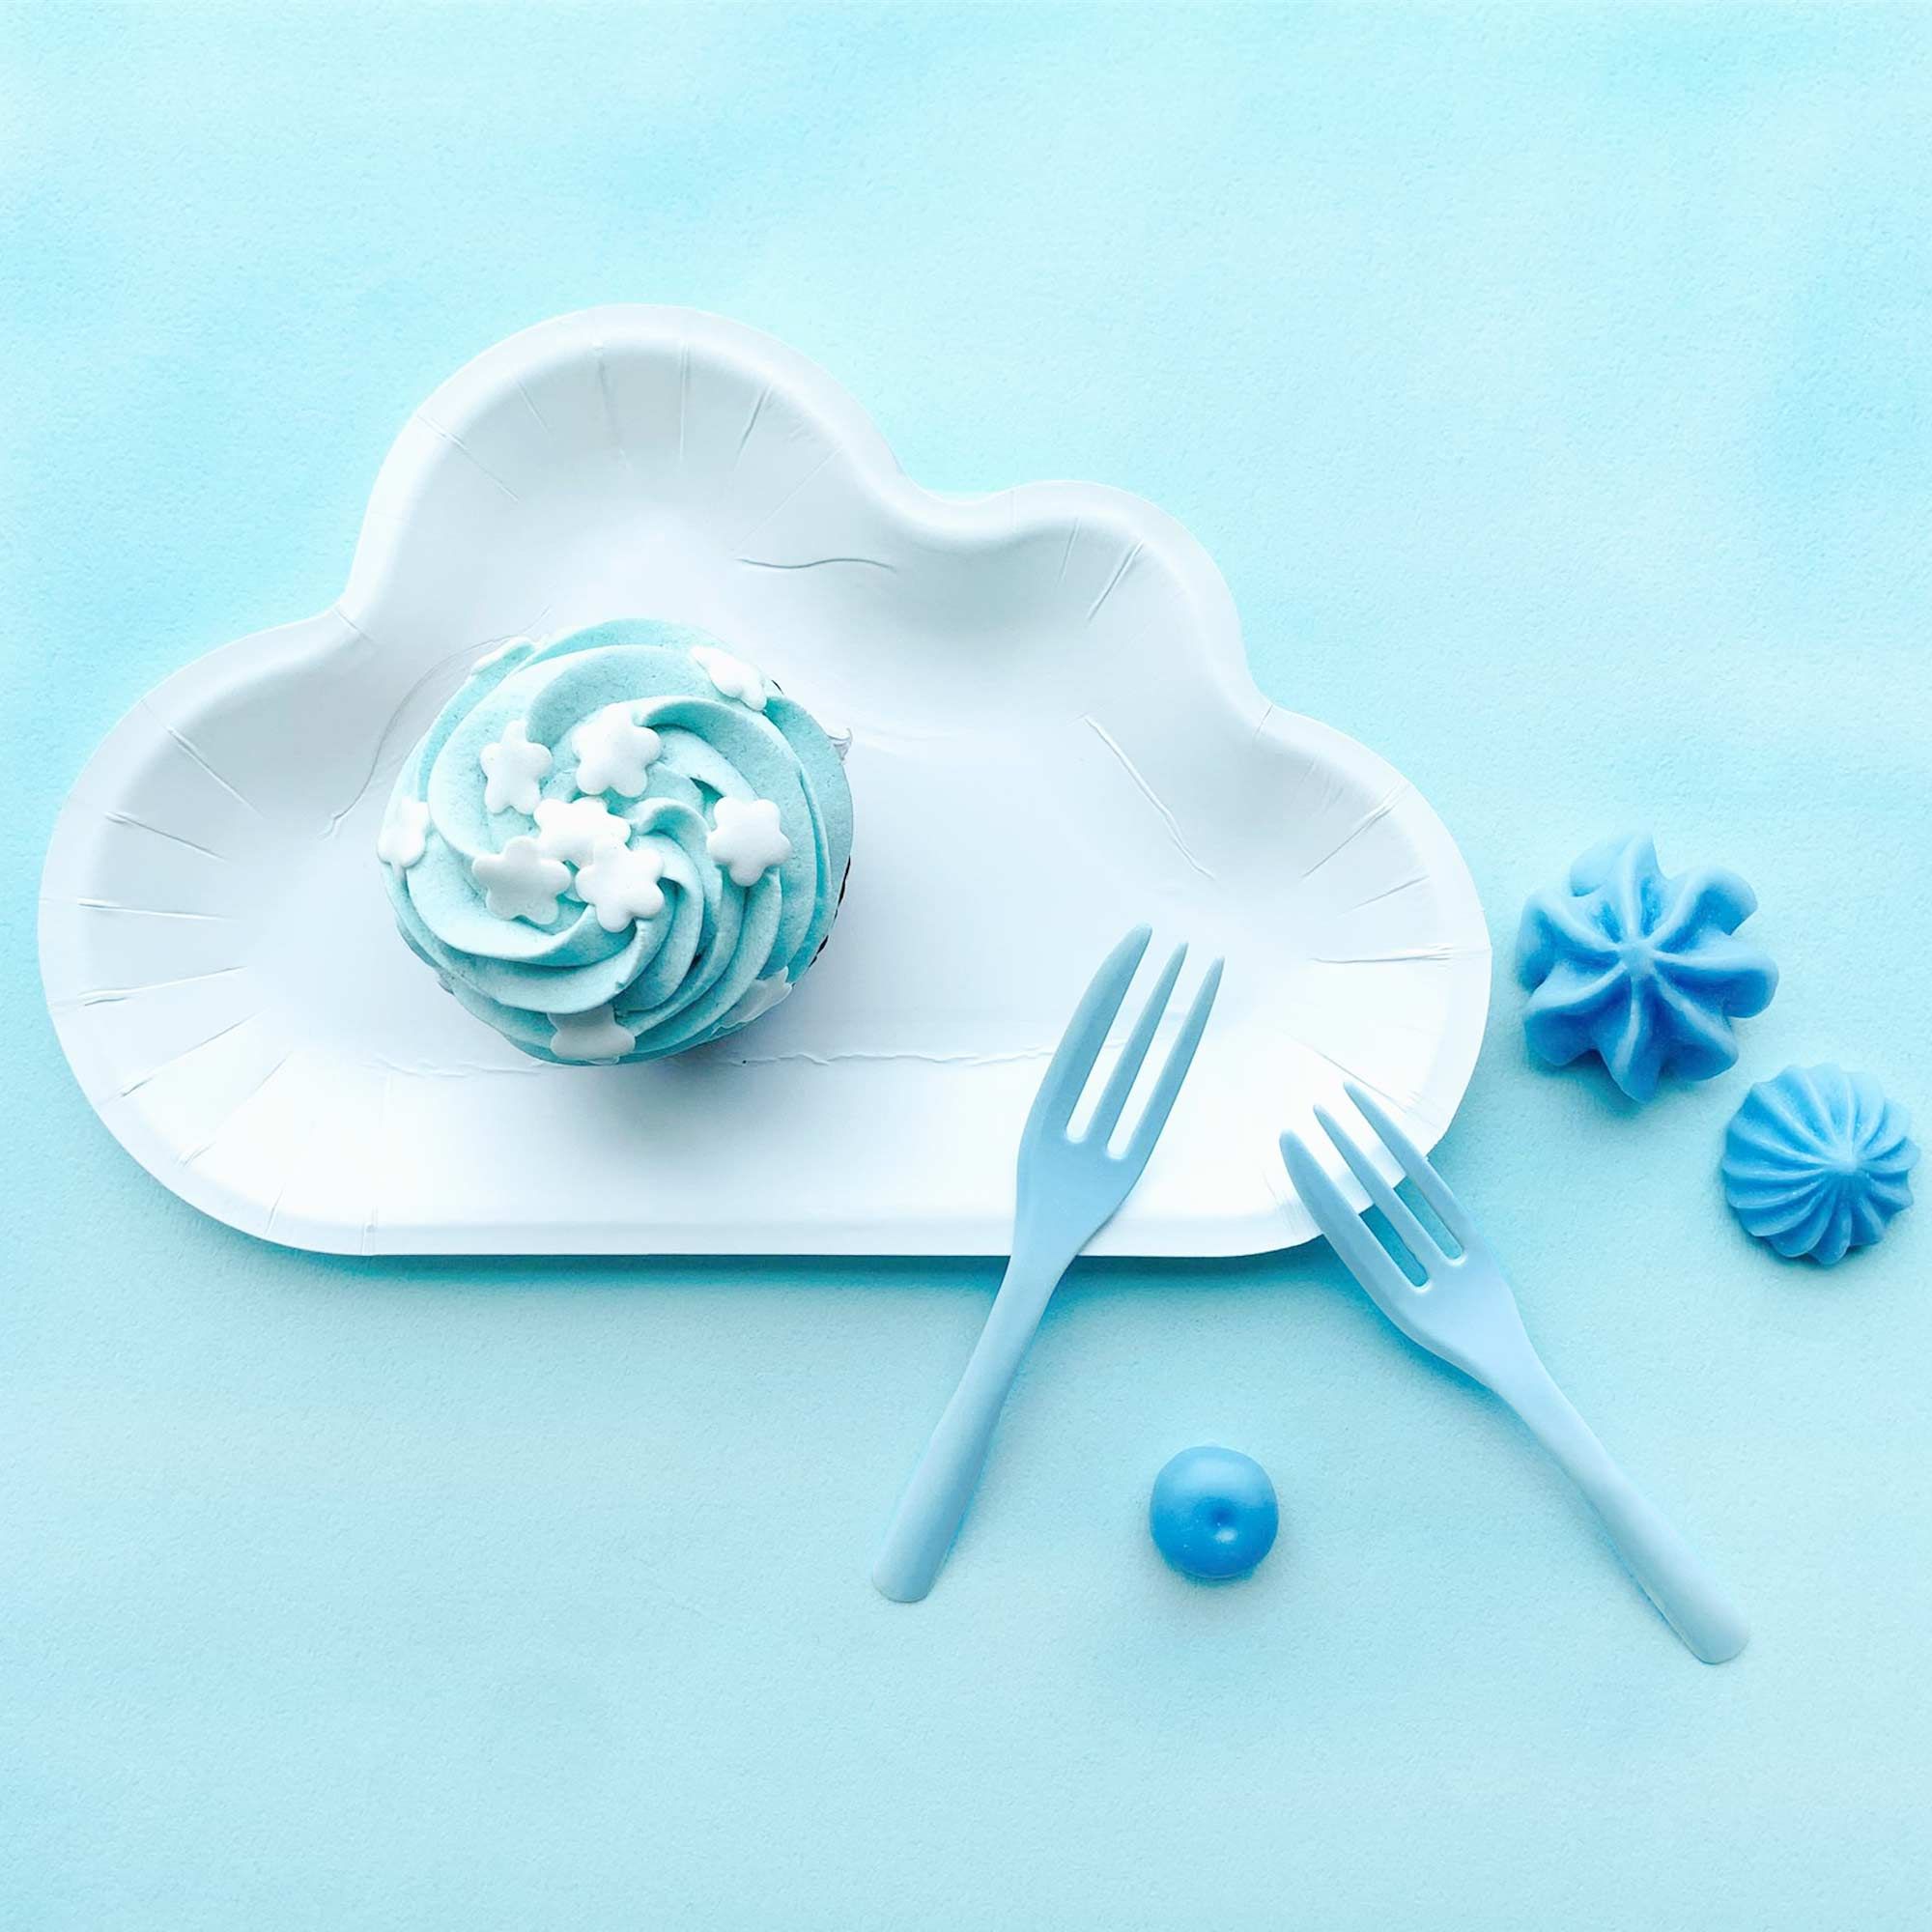 The white cloud-shaped plate paired with blue cake forks creates an atmosphere reminiscent of a blue sky with fluffy clouds.